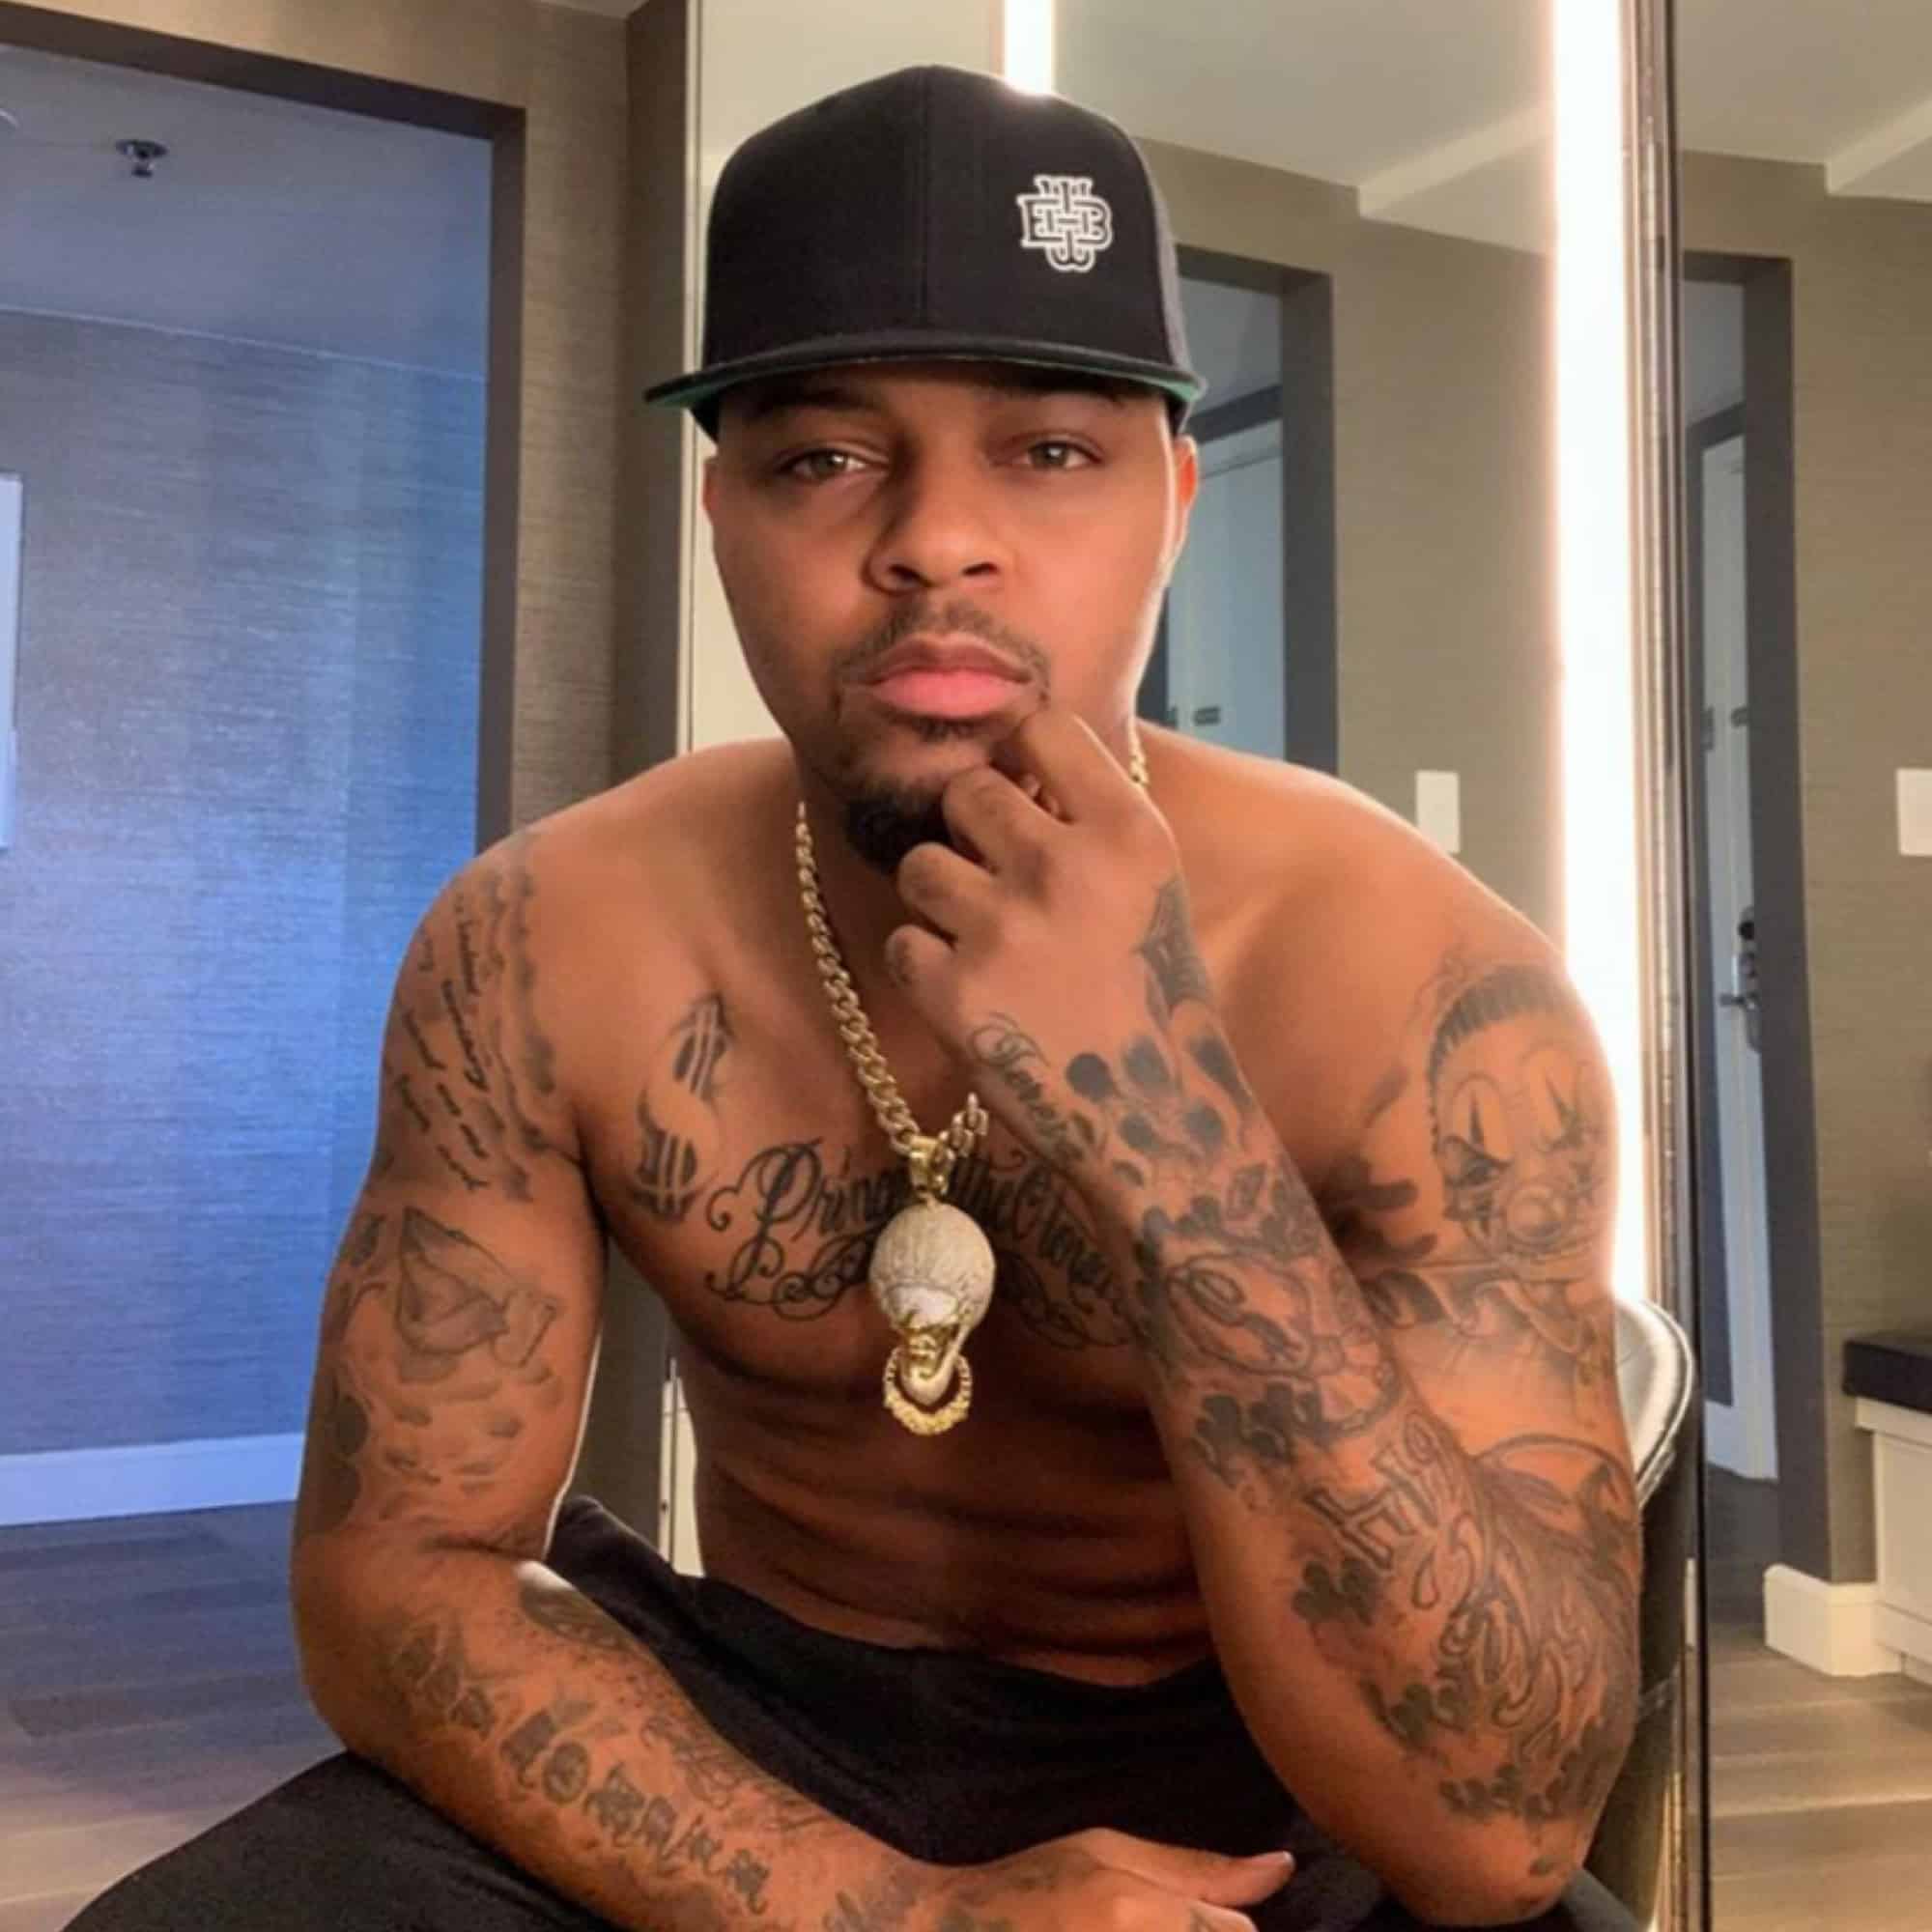 Bow Wow Announces New Album “Dedicated To My Ex’s” Following Leaked